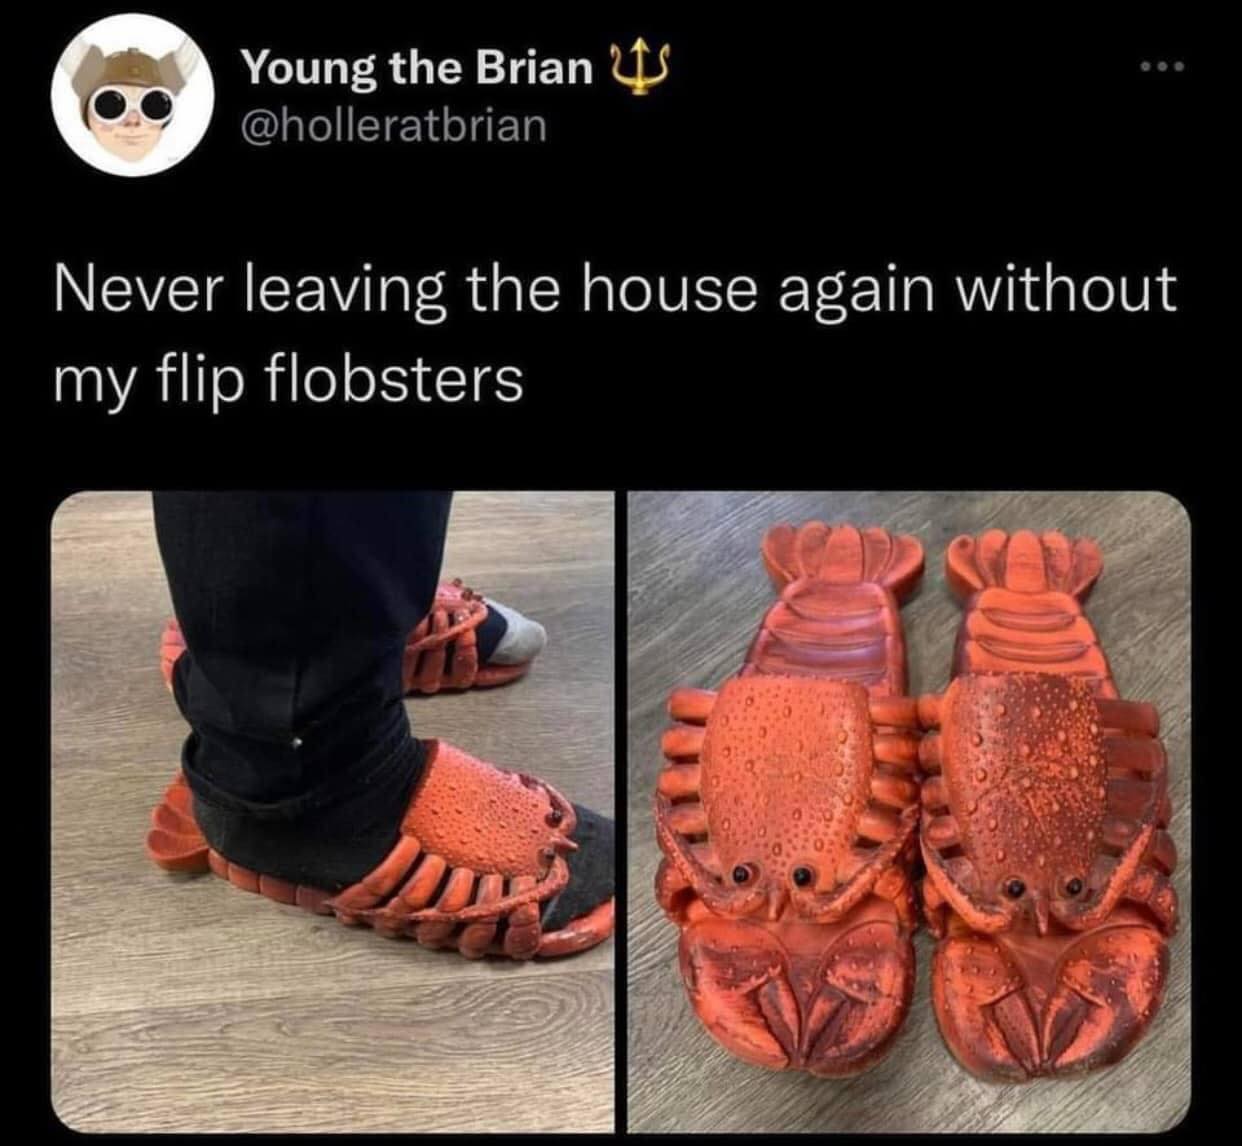 redneck memes and pics - flip flobsters - Young the Brian Never leaving the house again without my flip flobsters